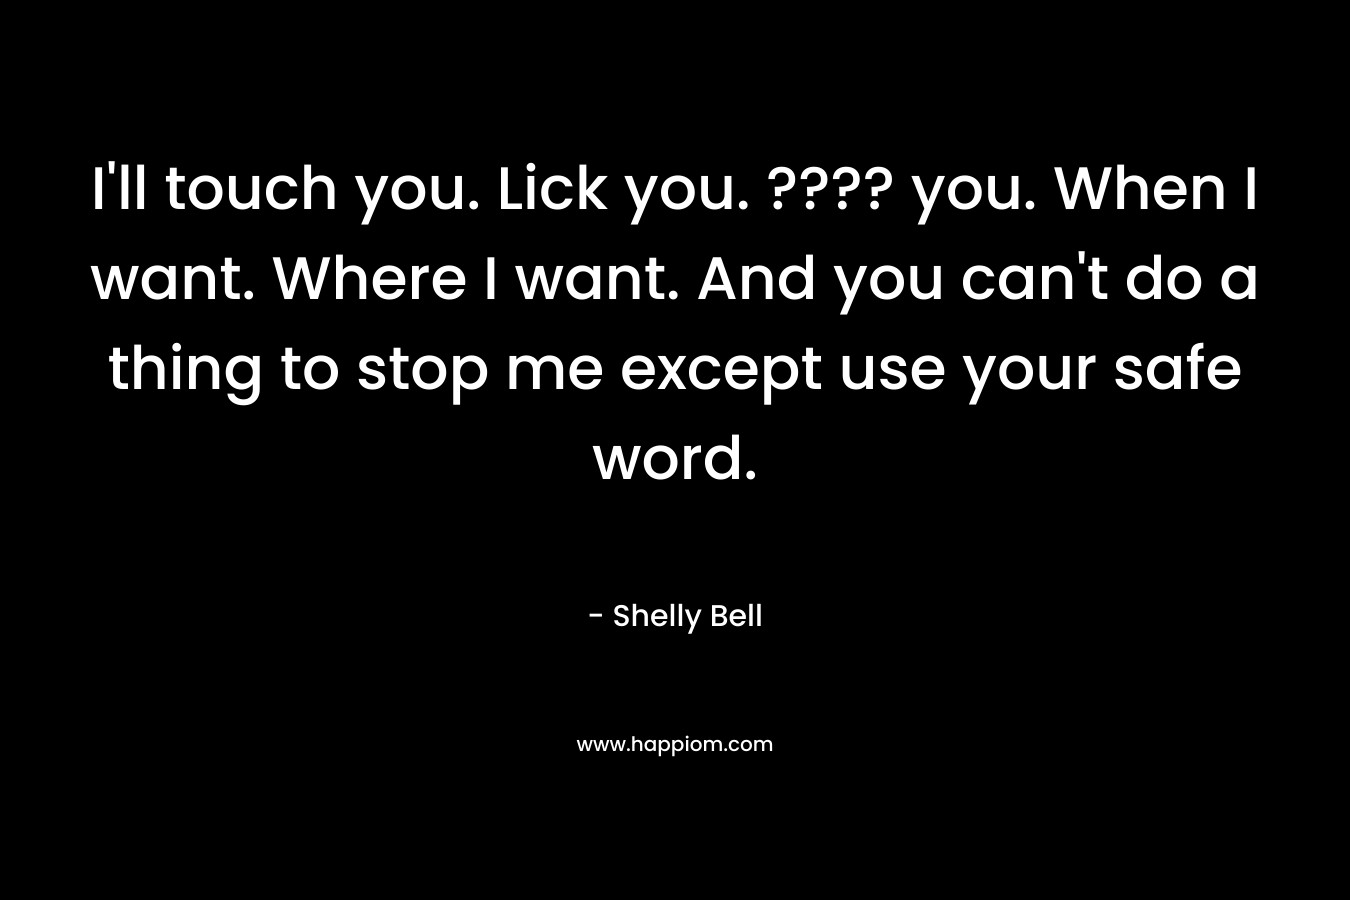 I’ll touch you. Lick you. ???? you. When I want. Where I want. And you can’t do a thing to stop me except use your safe word. – Shelly Bell